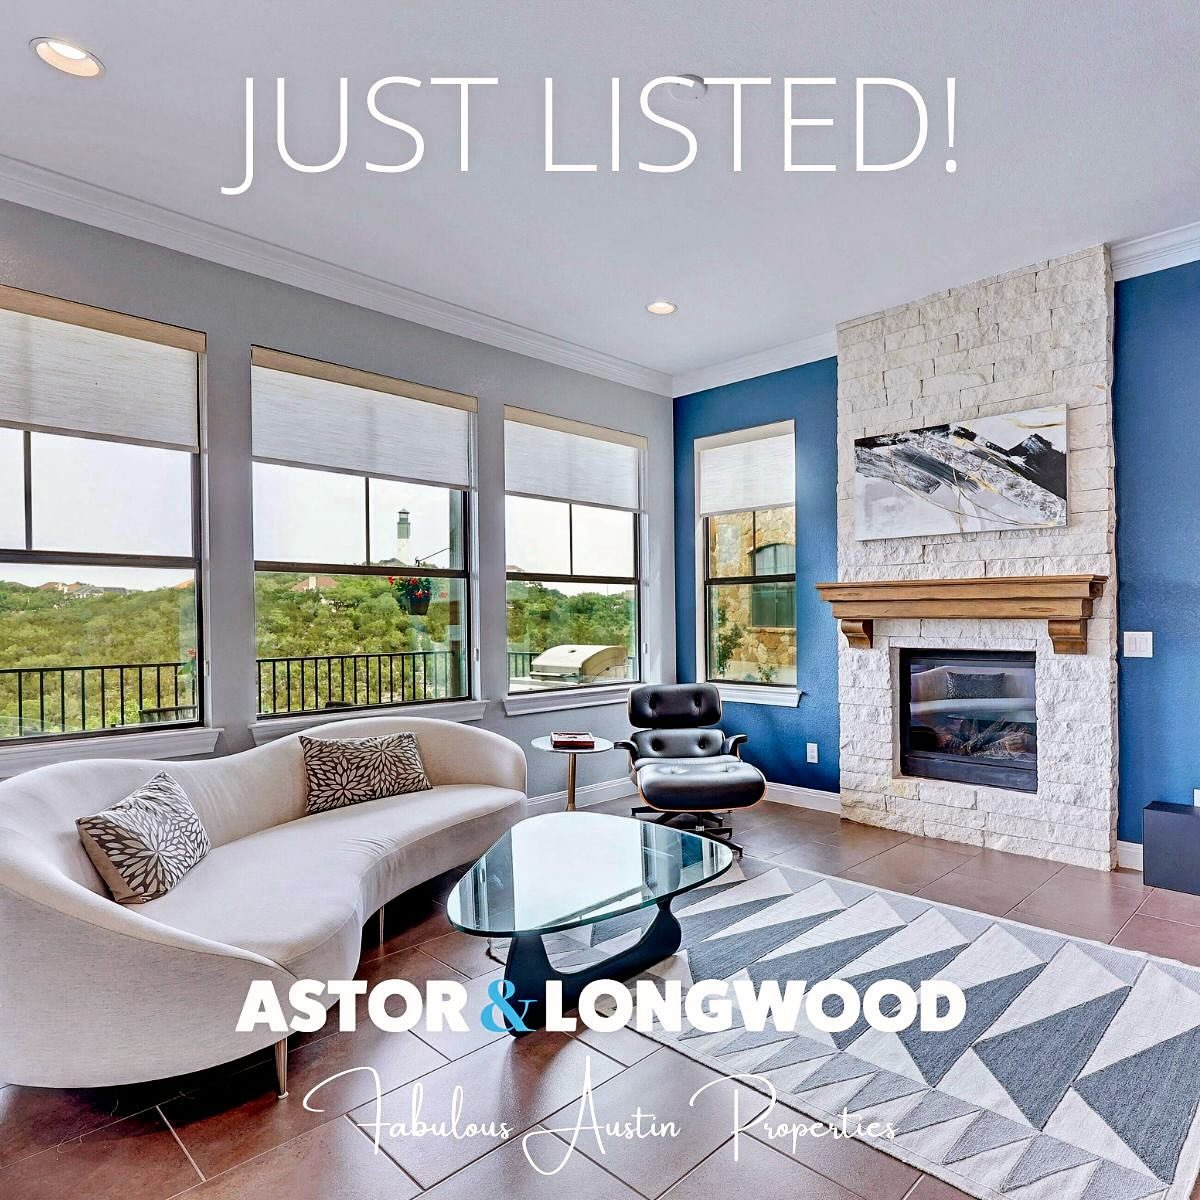 Wow! What a view! Step into this marvelously located, delightfully spacious and light-filled townhome and enjoy a spectacular vista from every room of a stunning hill country landscape. This beautifully maintained and special home is move-in ready an